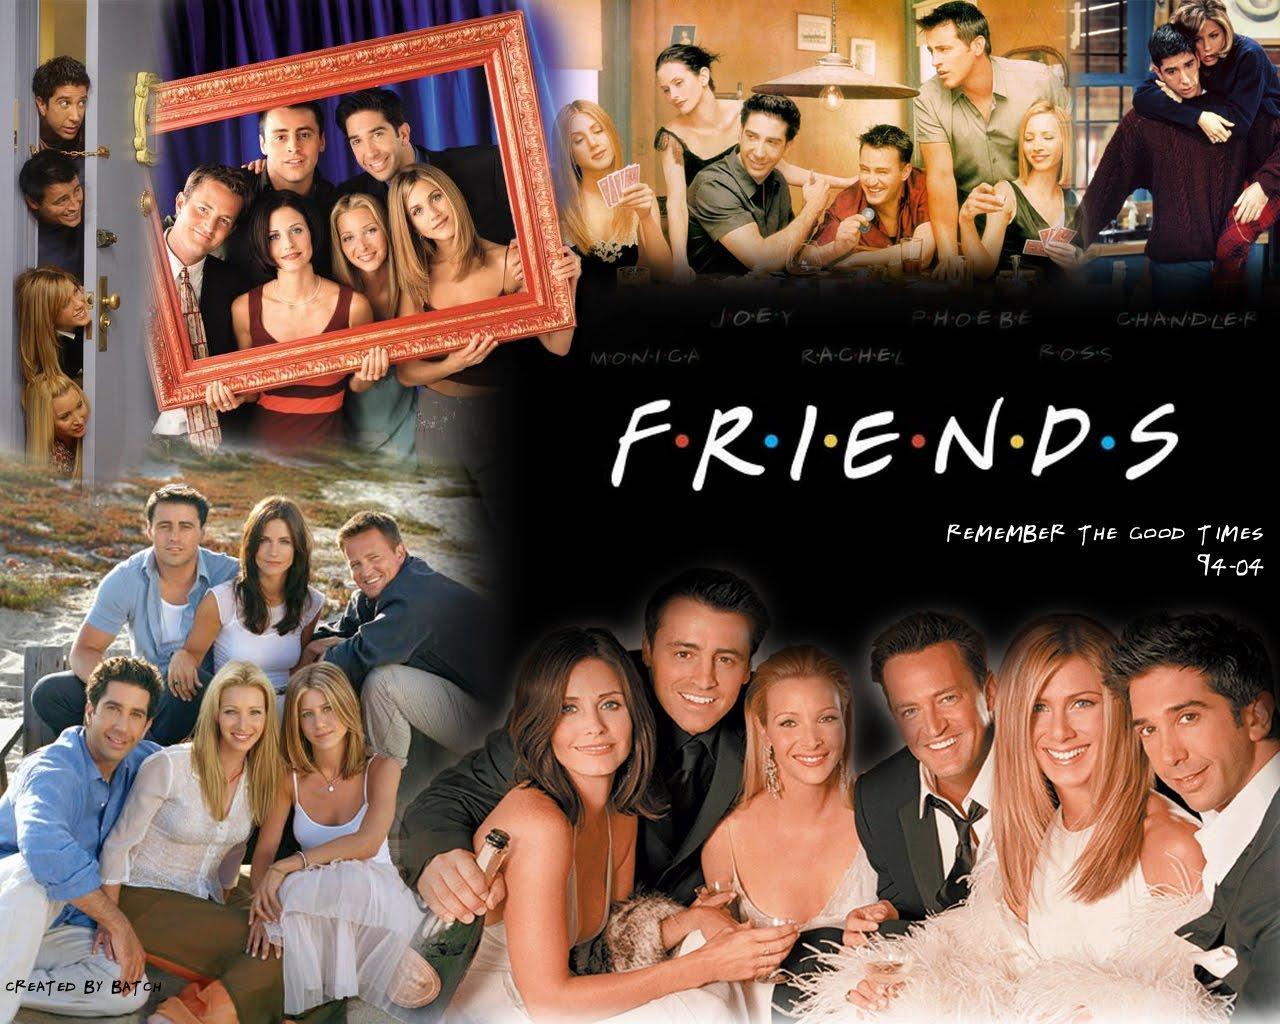 Friends Collage Wallpapers - Top Free Friends Collage Backgrounds